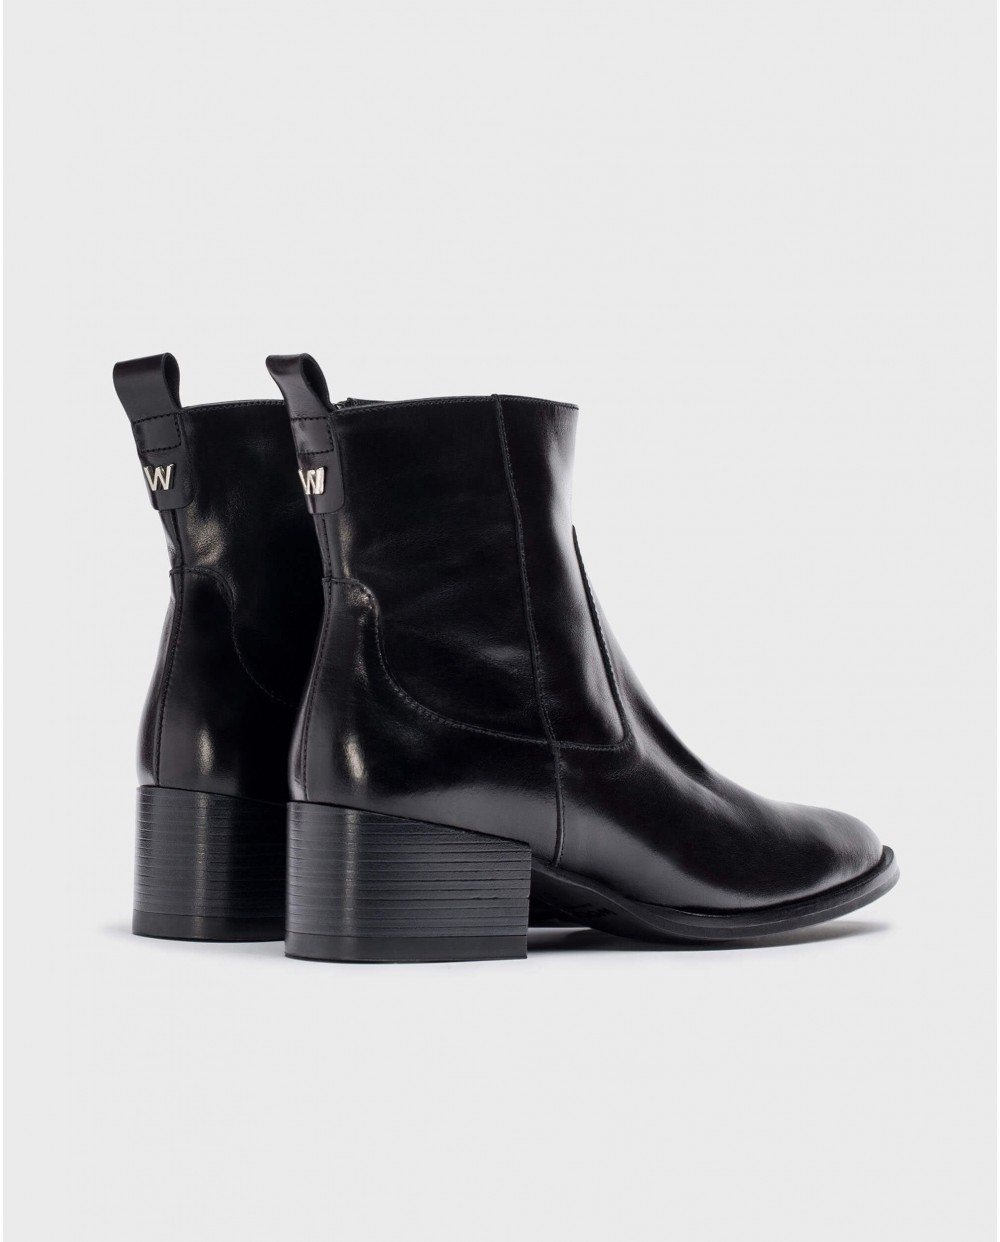 Wonders-Ankle Boots-Black LOOK ankle boot